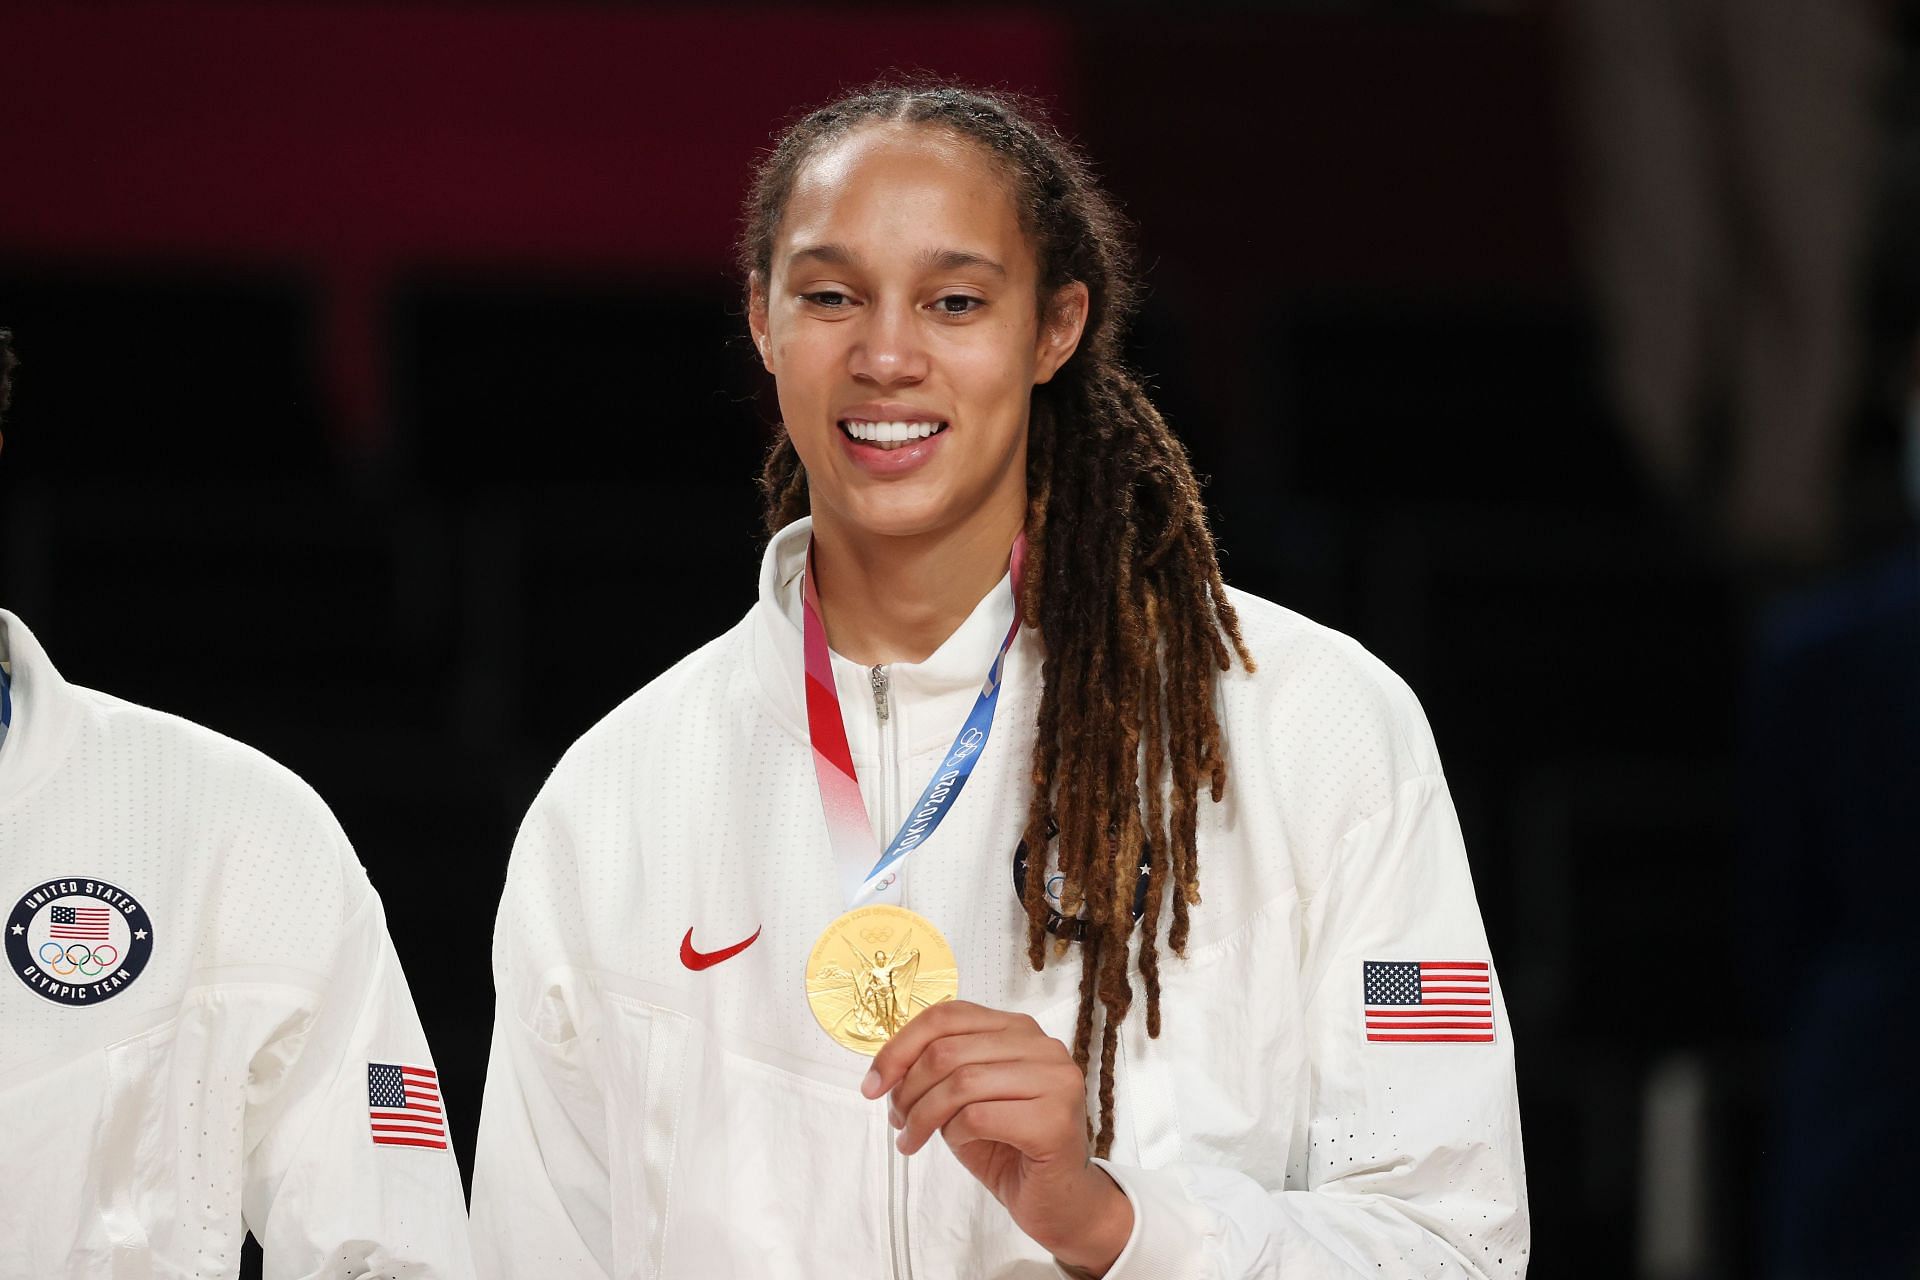 Brittney Griner is a two-time Olympic gold medalist.